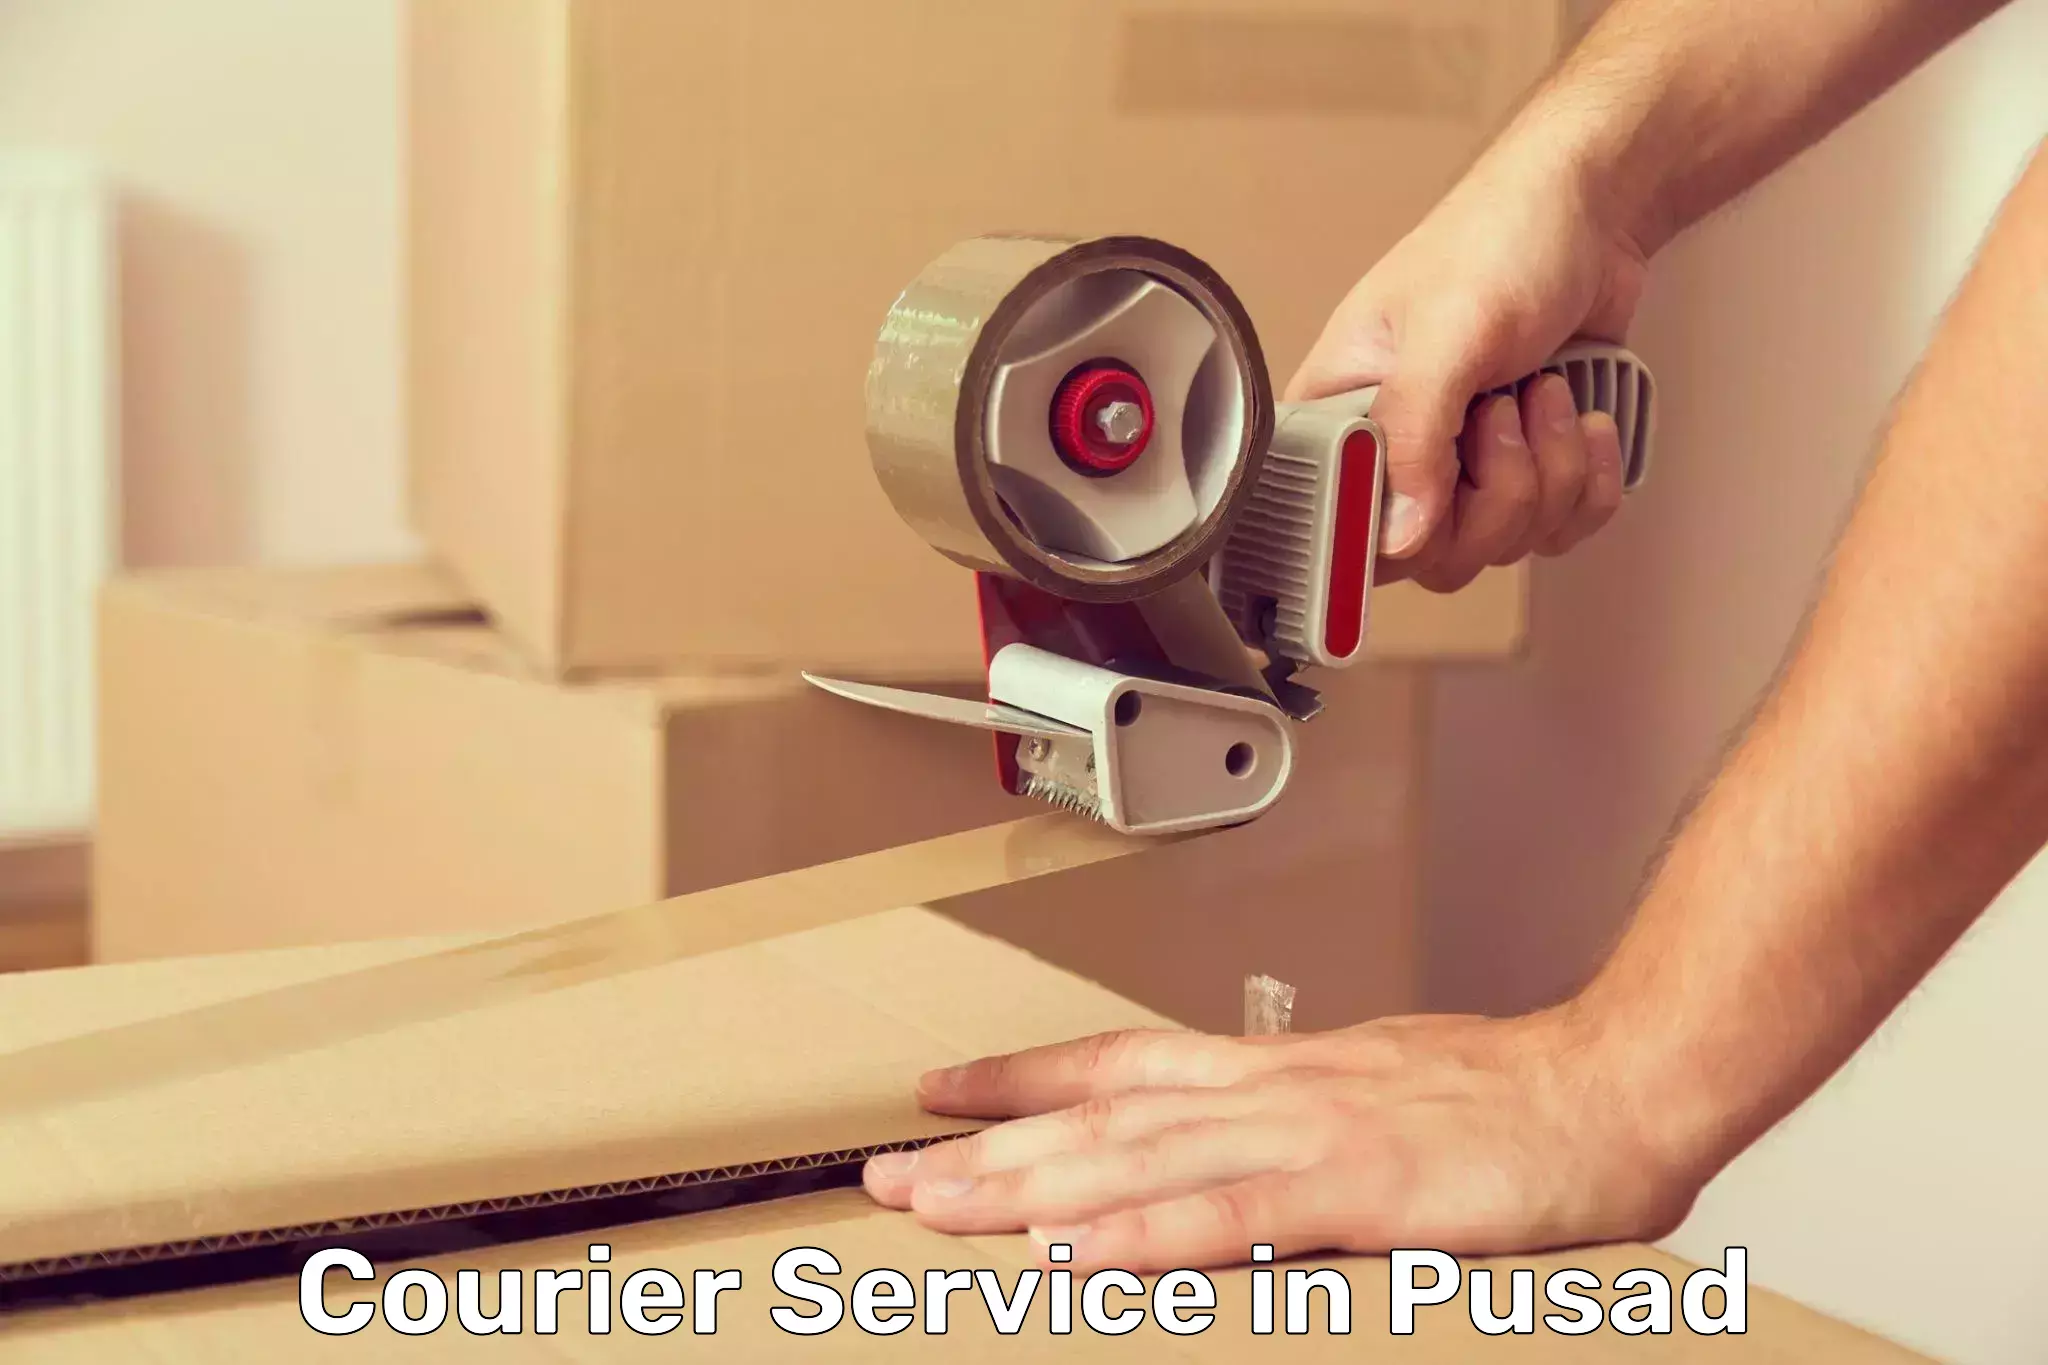 Customer-focused courier in Pusad